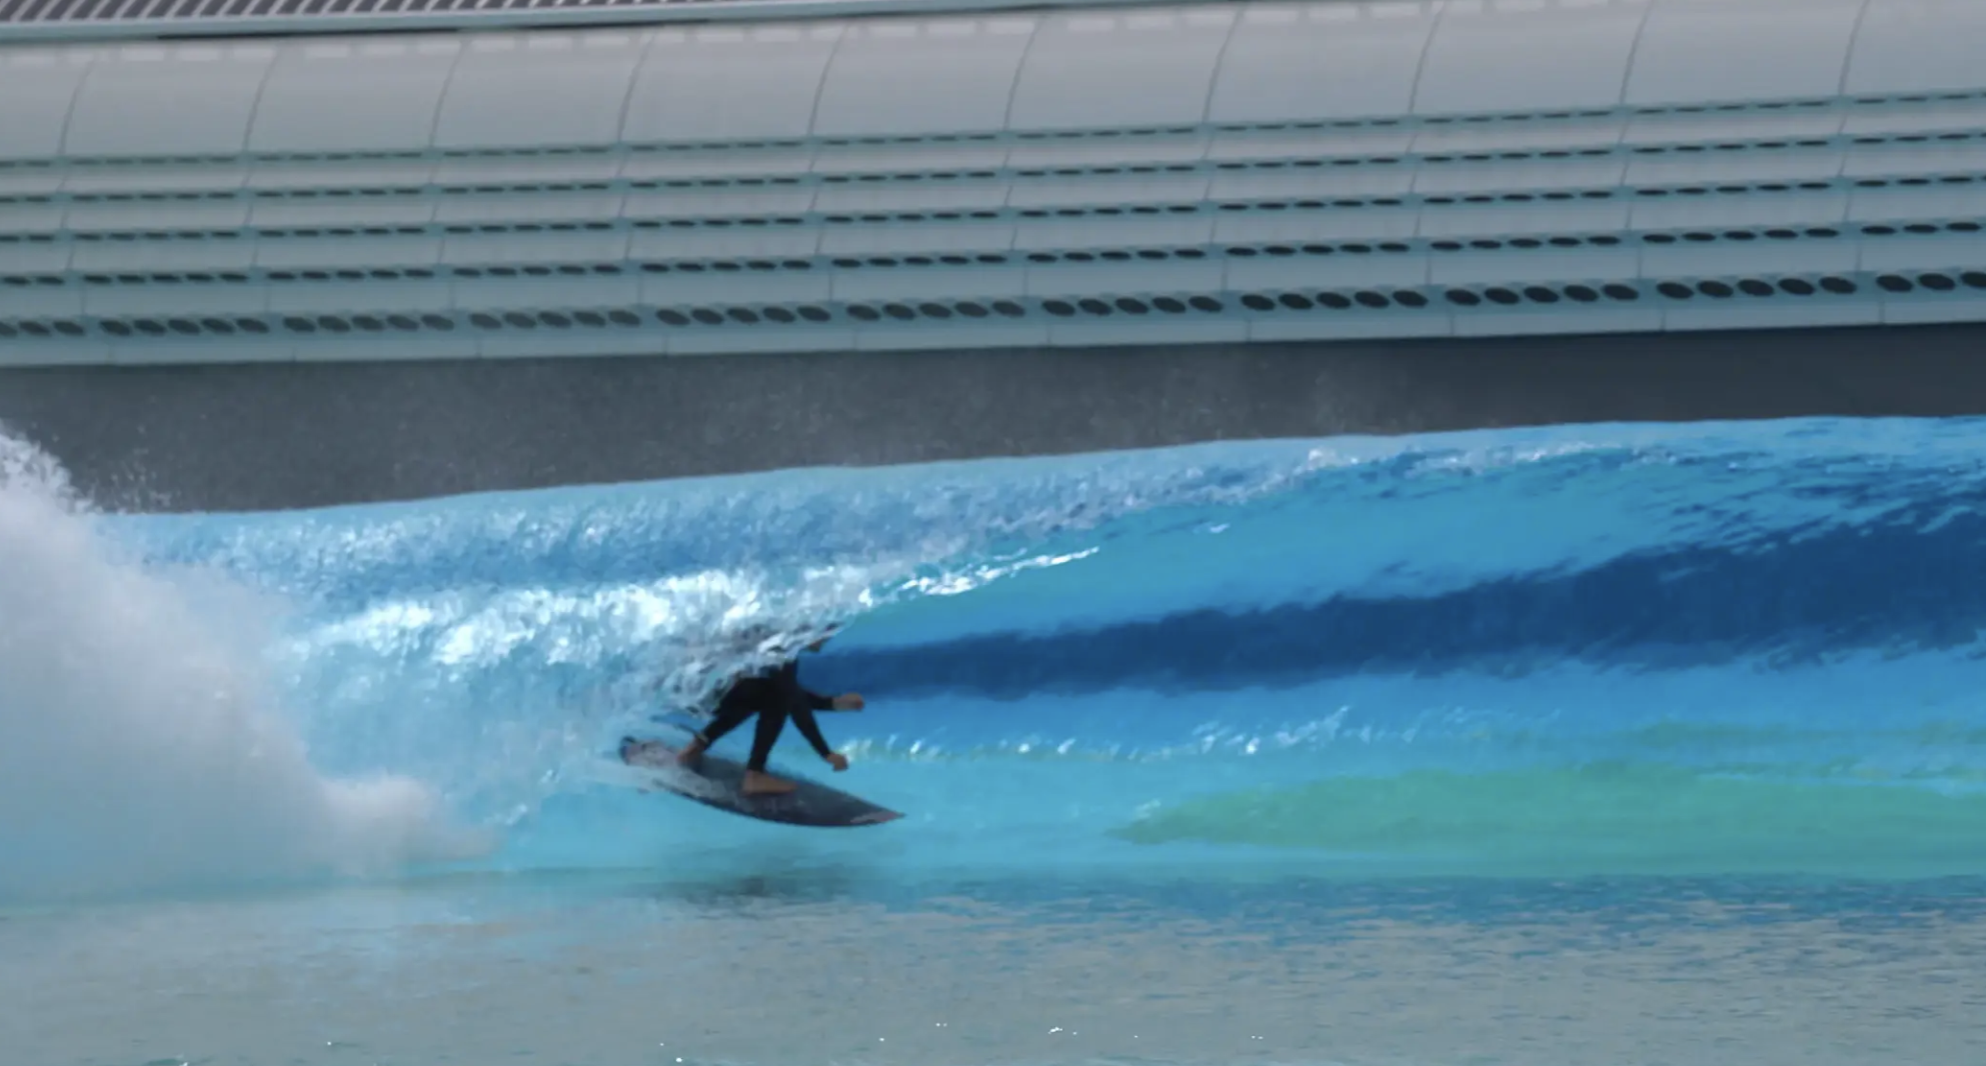 WavePark South Korea Commissioned and Opening Soon